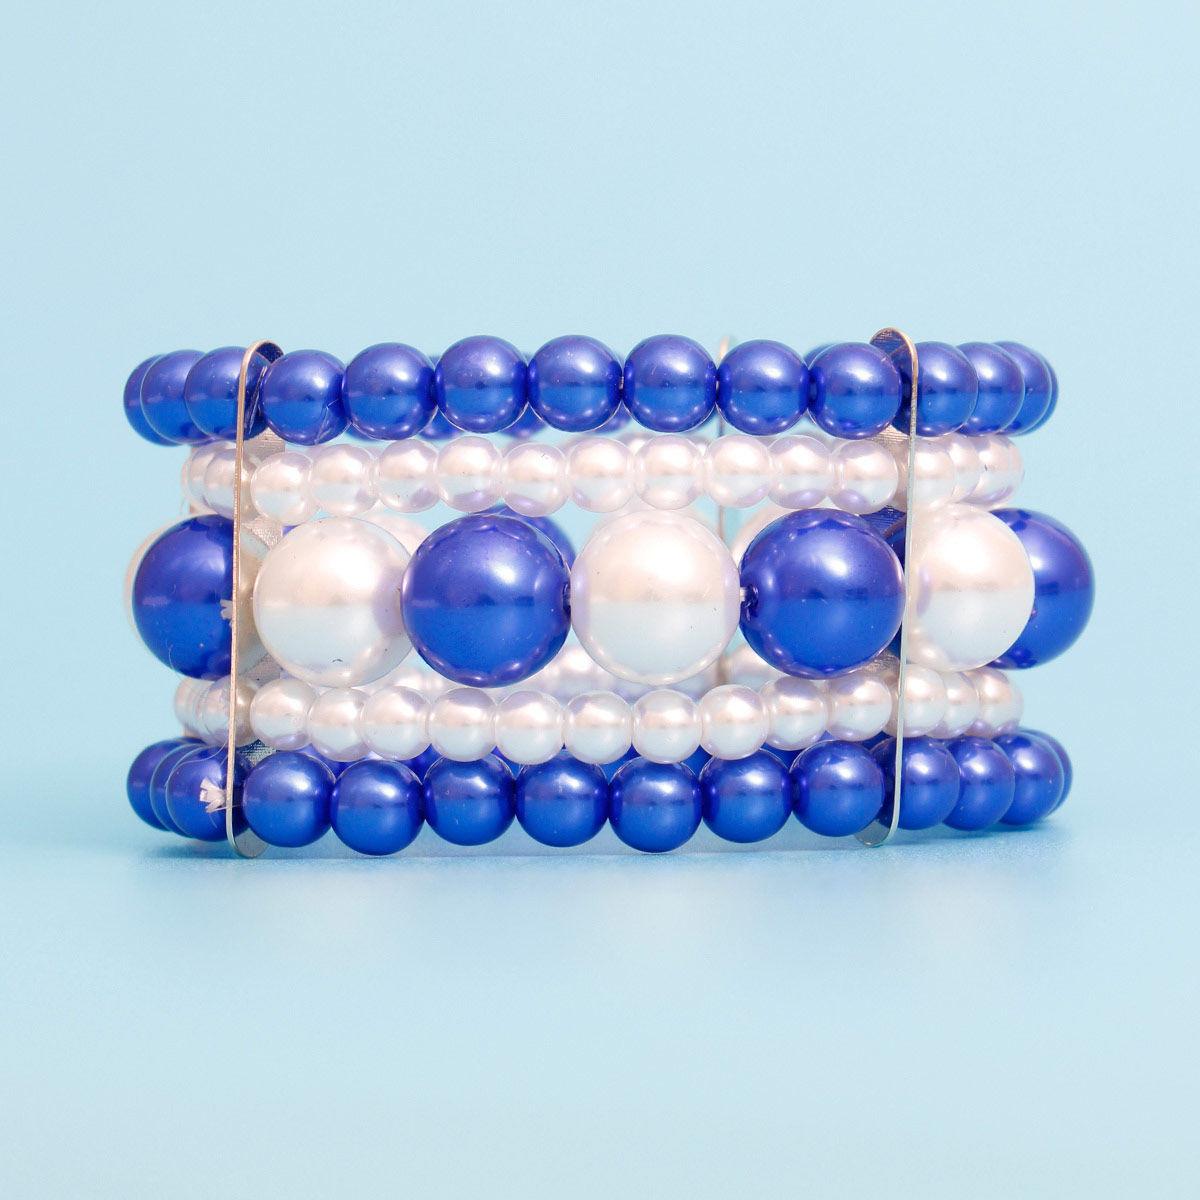 Shop Blue & White Pearl Bracelet for Her Fashion Jewelry